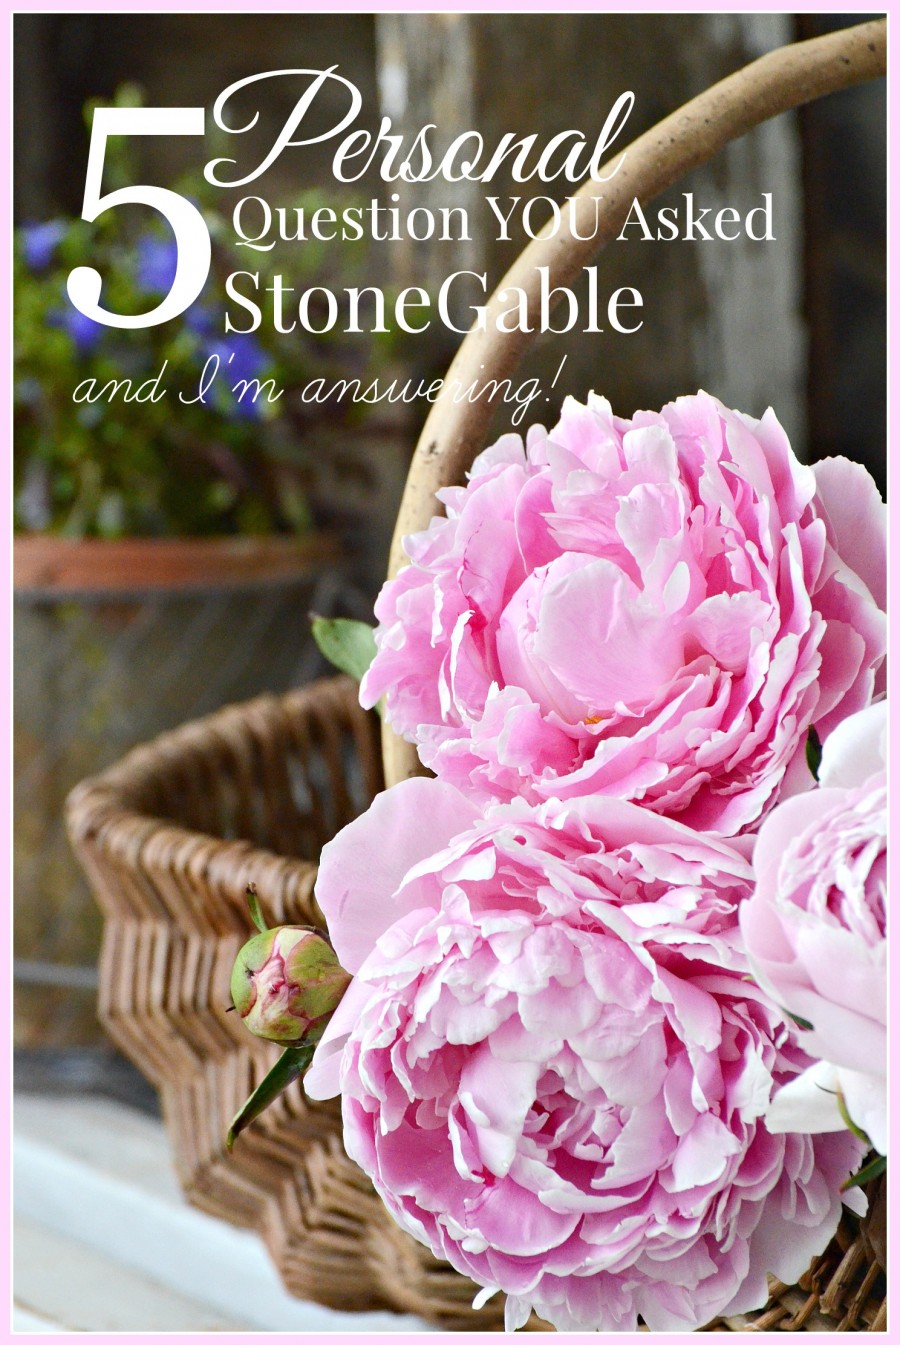 5 PERSONAL QUESTIONS YOU ASKED STONEGABLE…AND I’M ANSWERING!